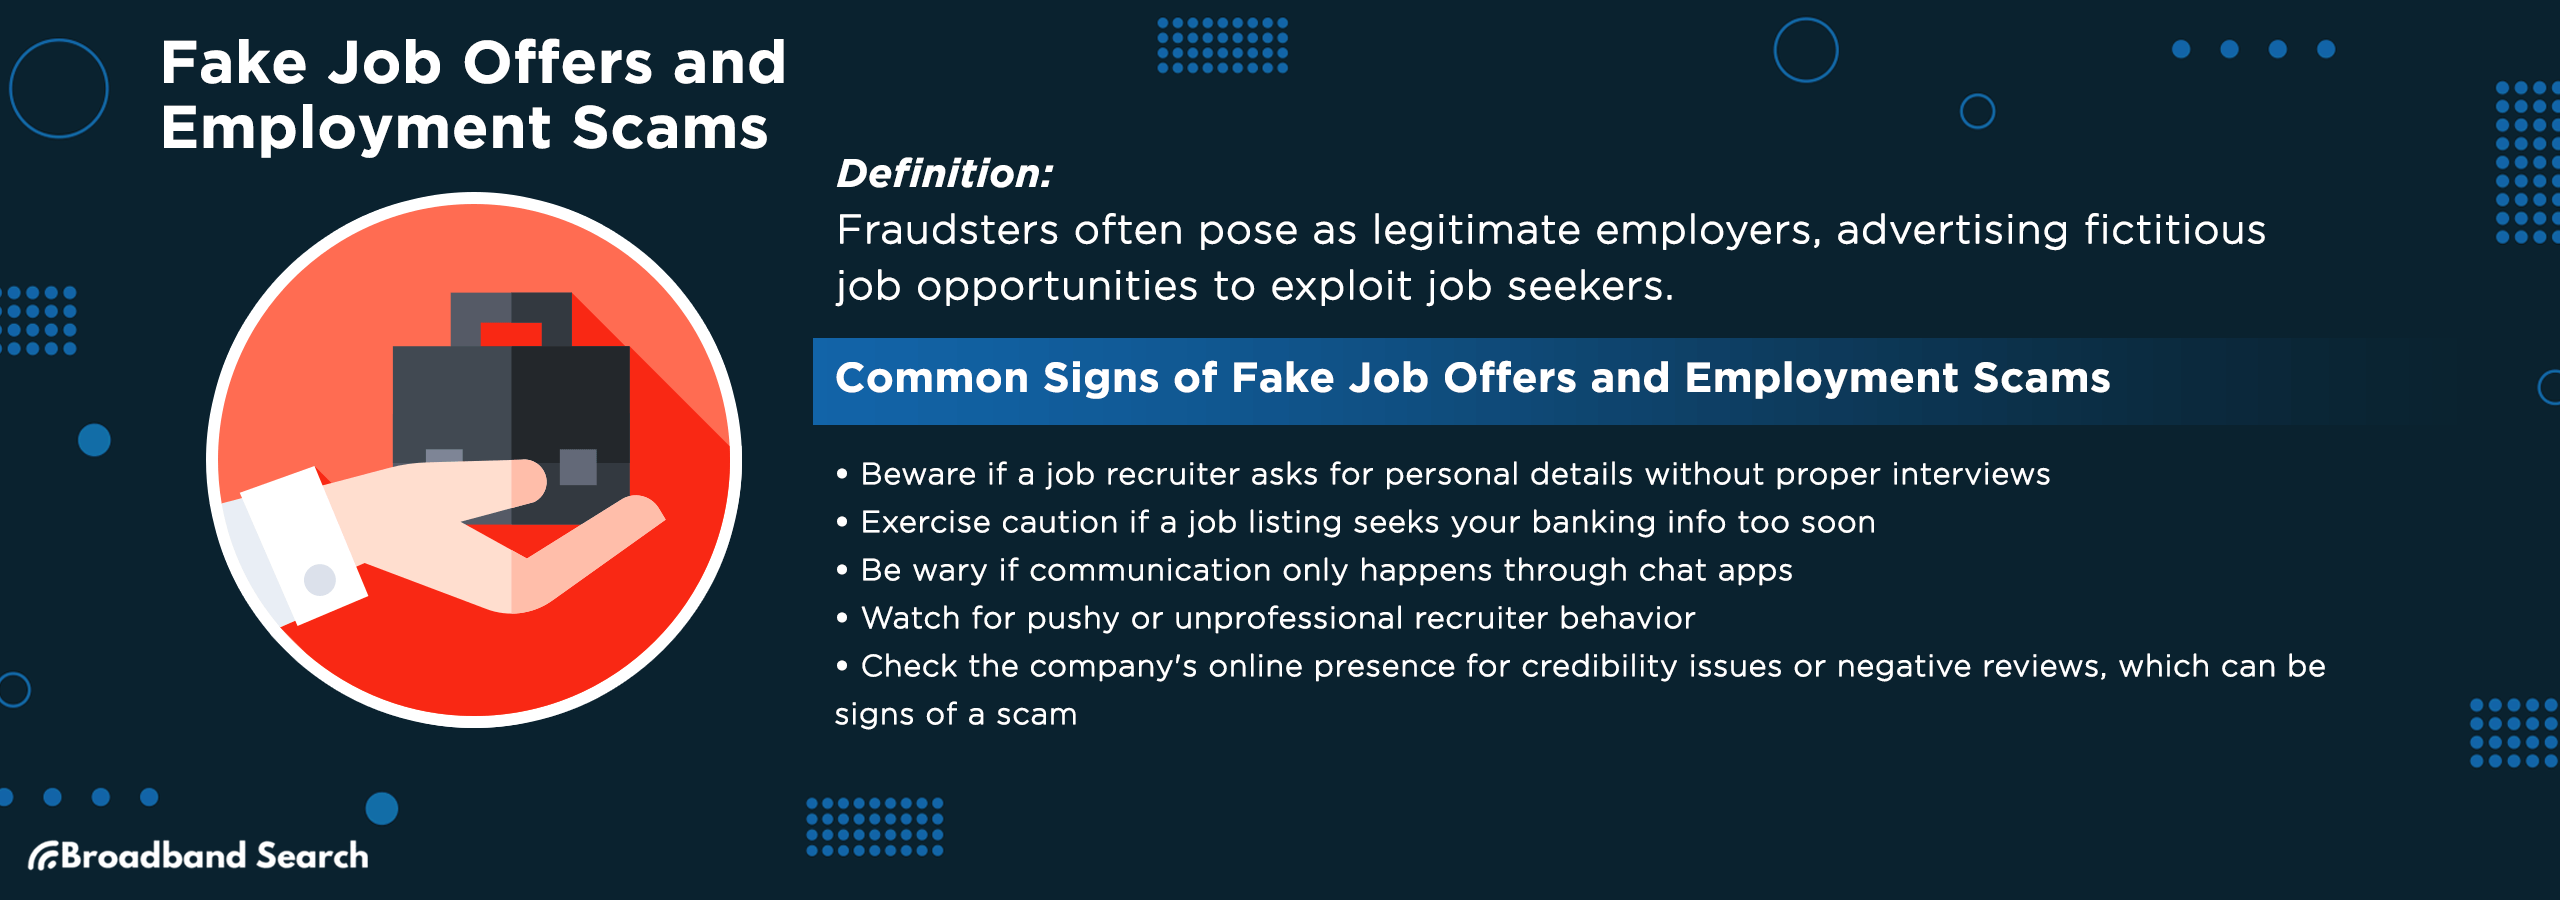 Definition and signs of fake job offers and employment scams